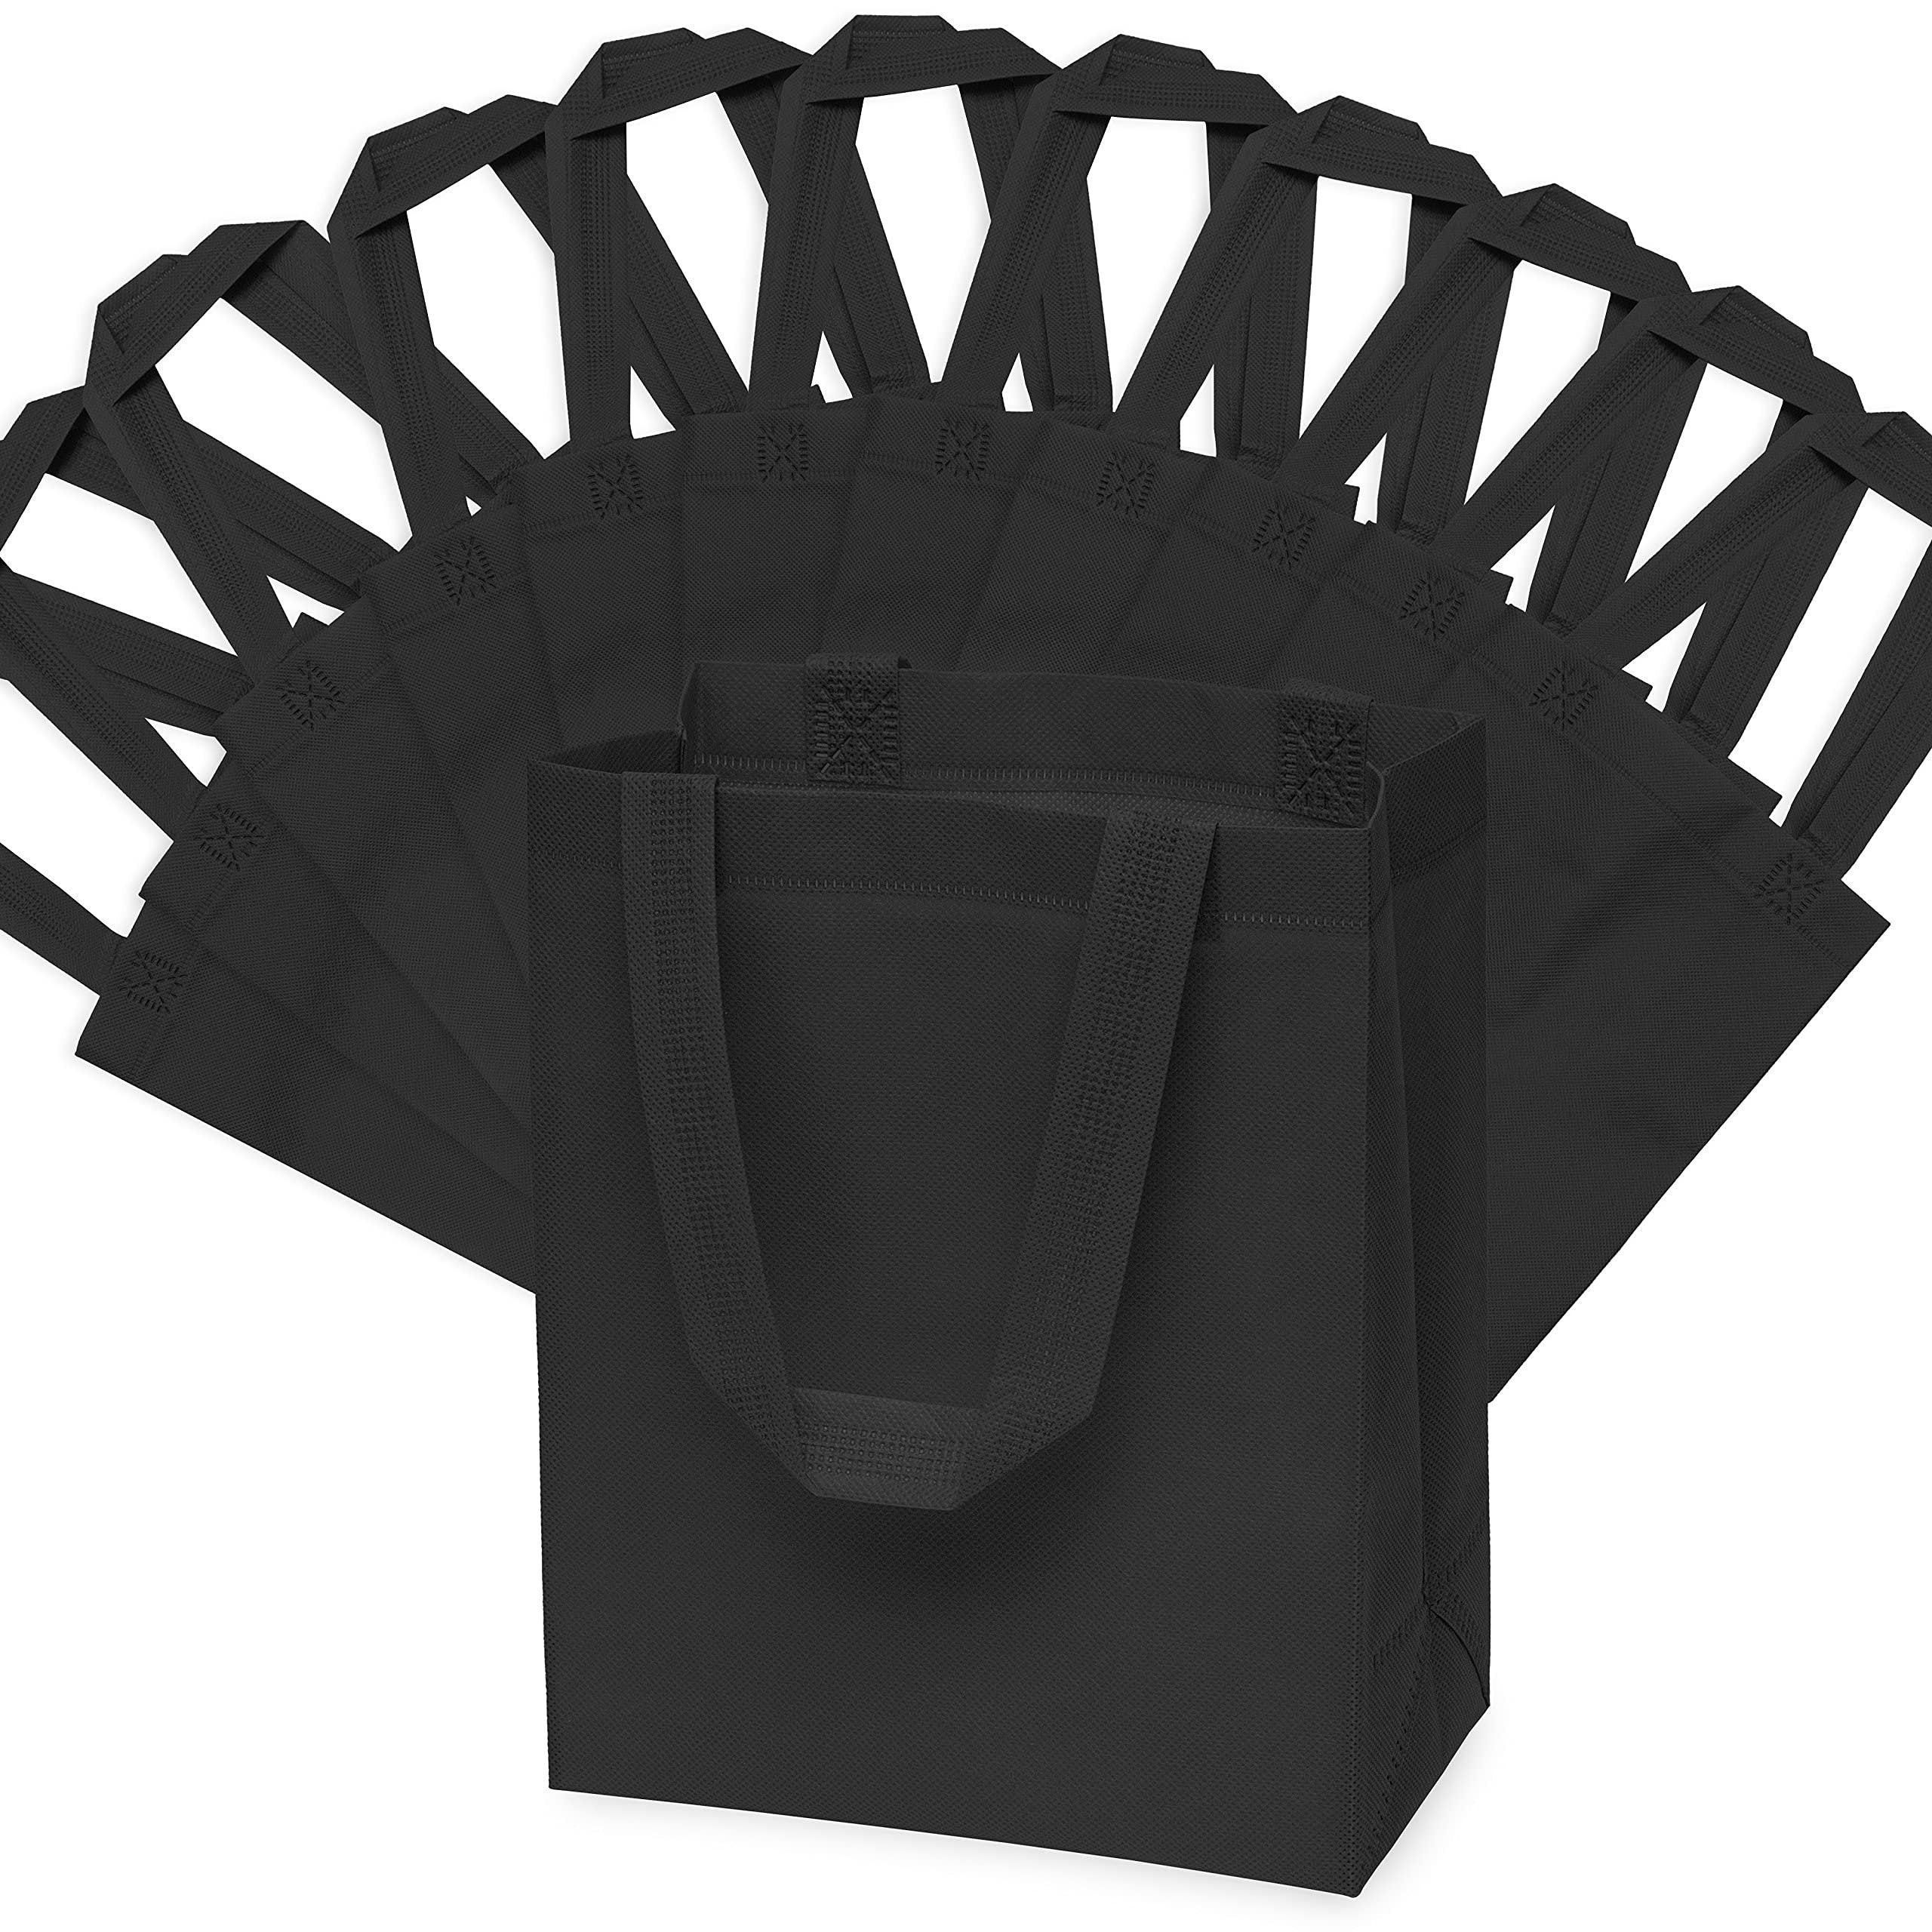 Reusable Gift Bags 12pk Small Black Eco-Friendly Fabric Totes for Shopping & Events - 8x4x10in